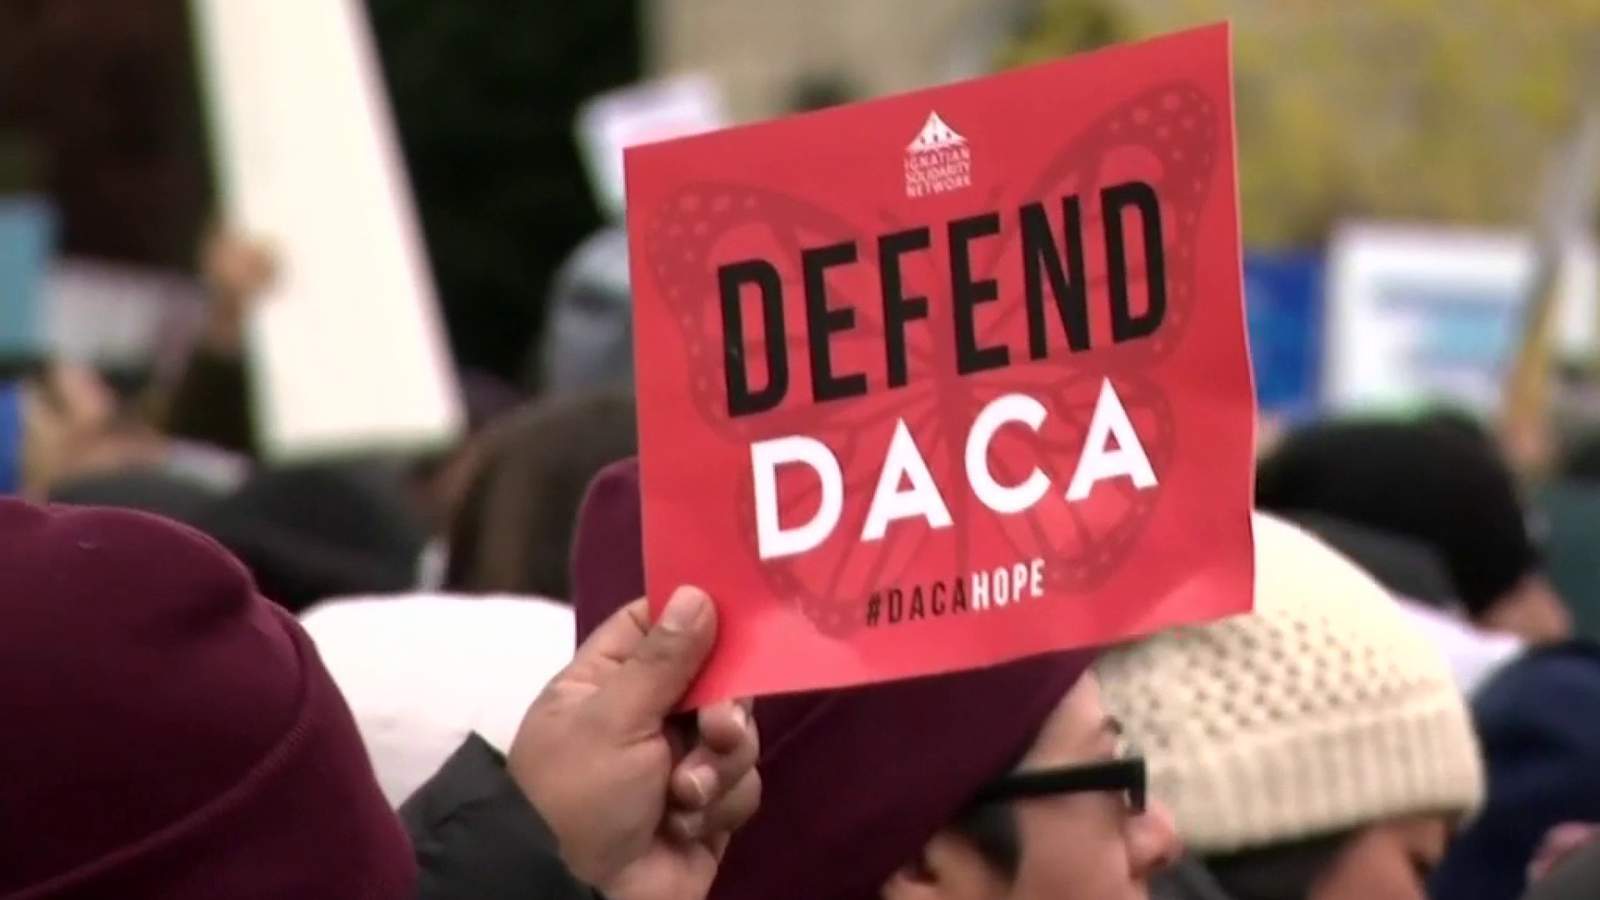 DACA recipients now have powerful ally in new bipartisan coalition